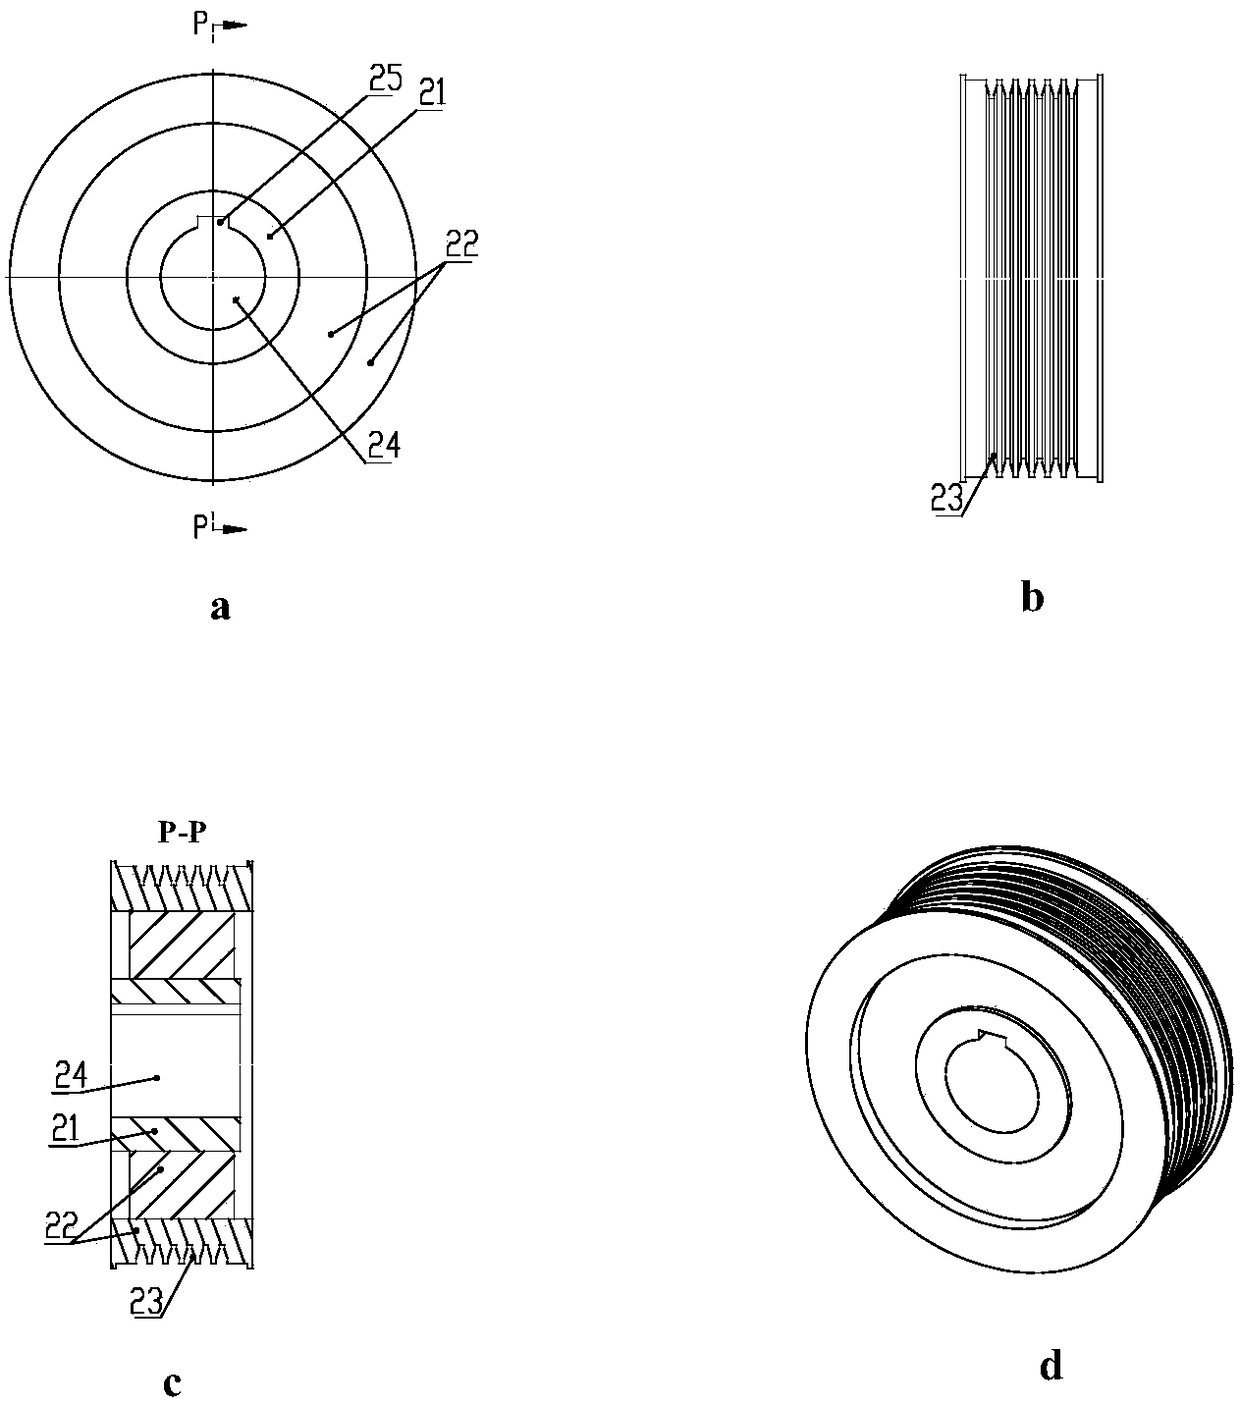 Traction wheel structure